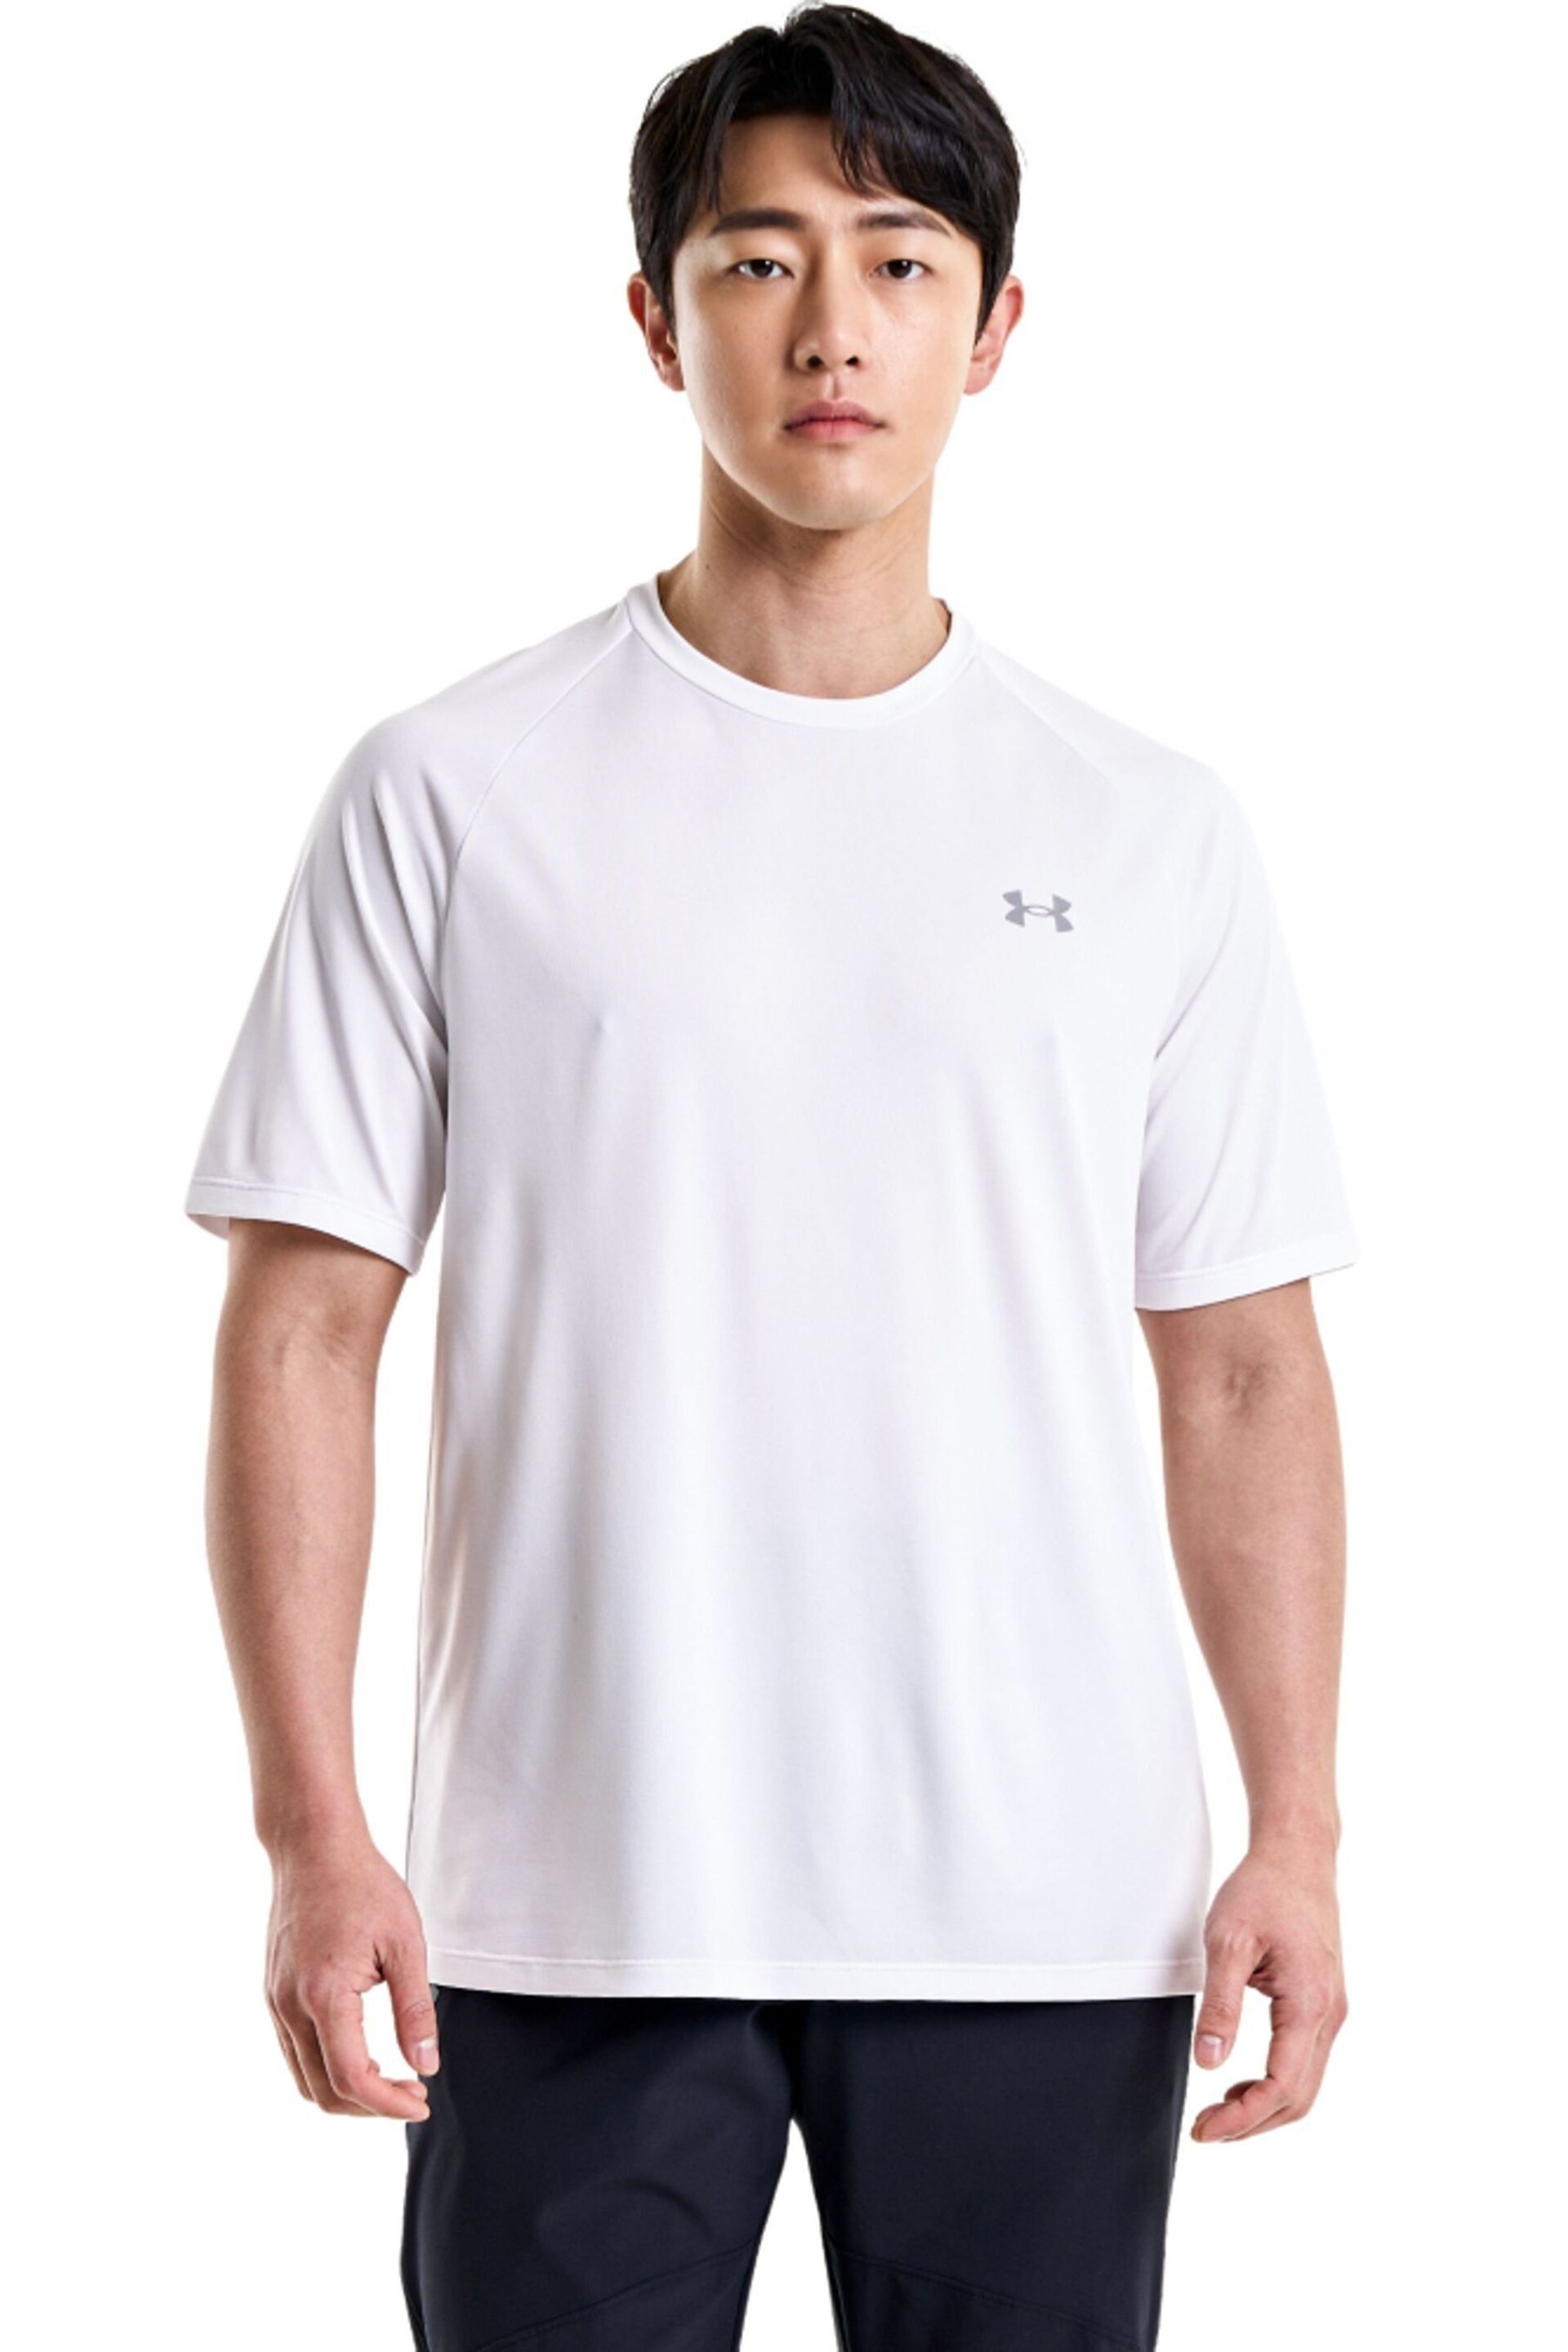 Under Armour Tech Reflective Short Sleeve T-Shirt - Image 1 of 7